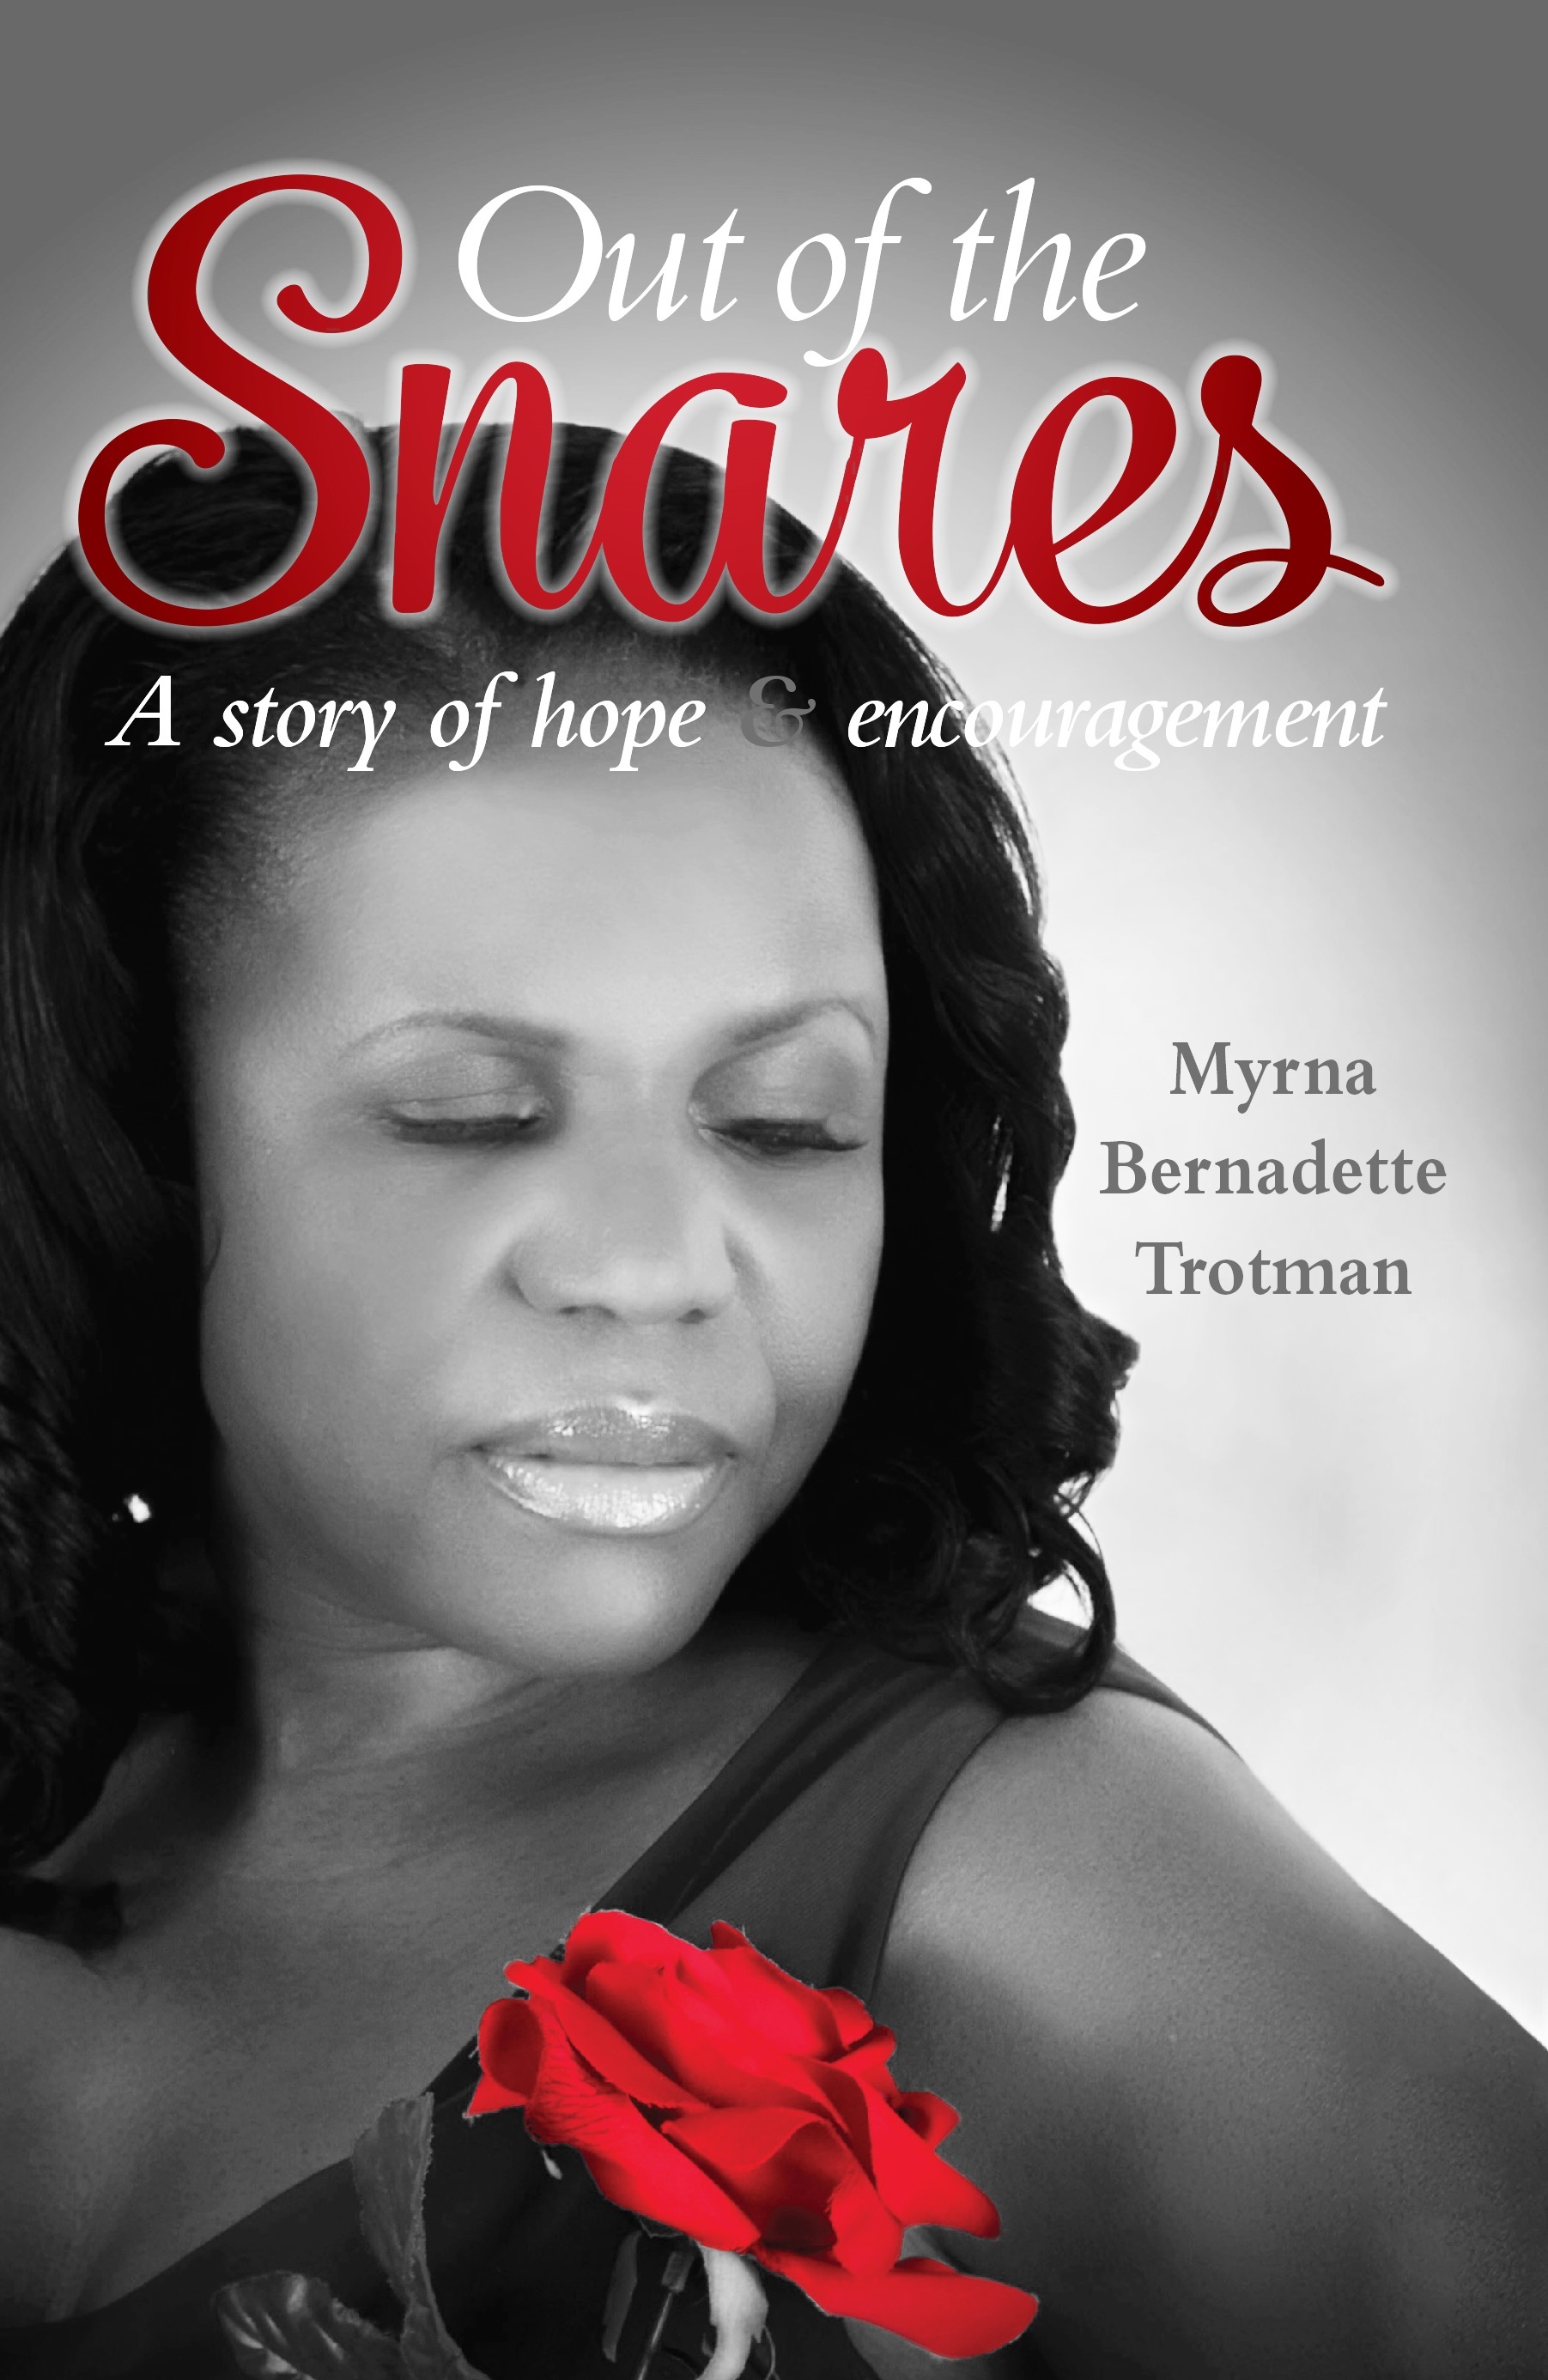 Out of the Snares, a story of hope and encouragement